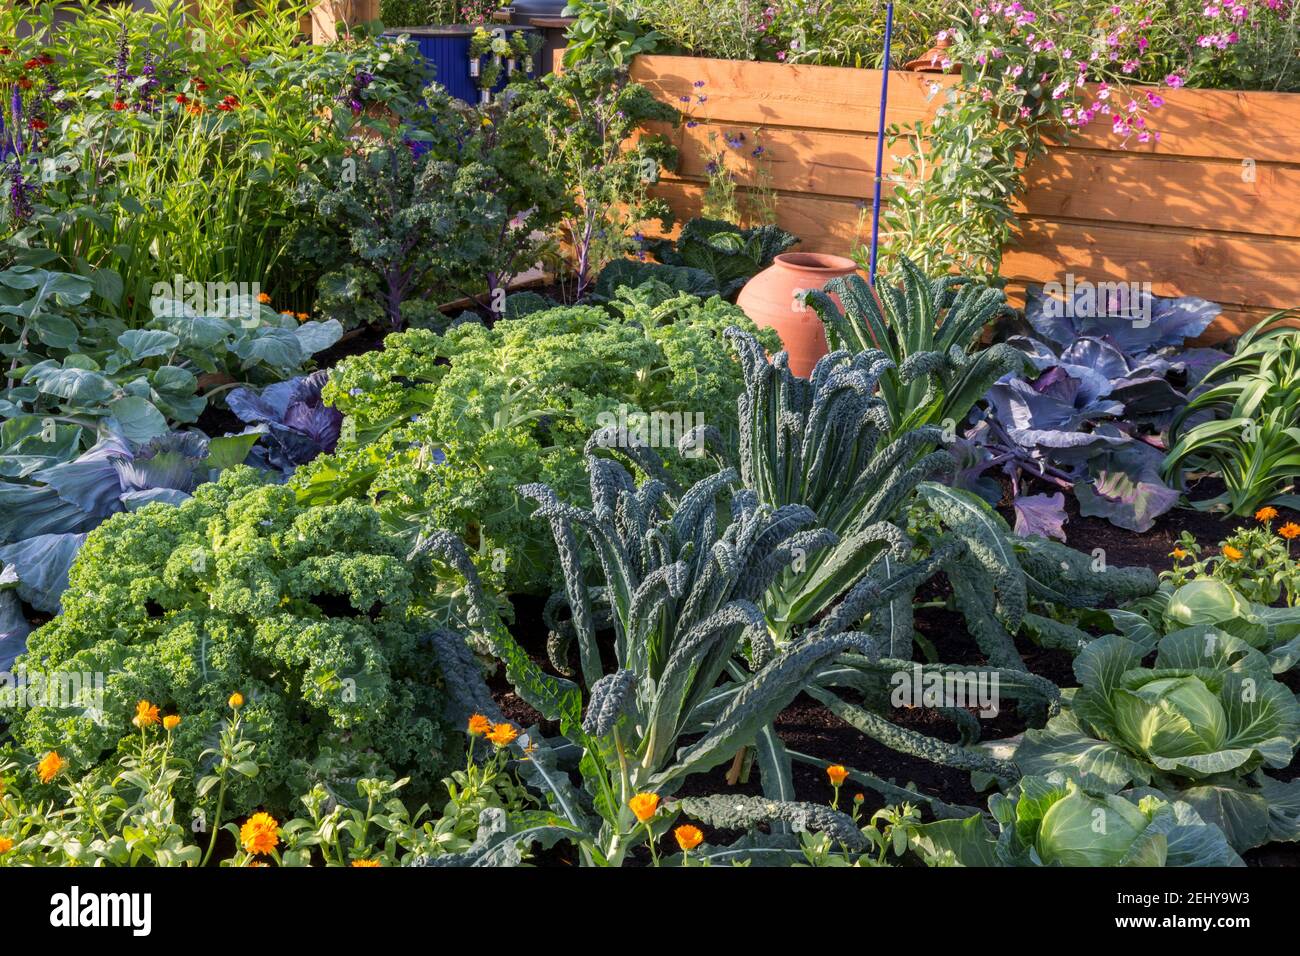 small organic kitchen vegetable garden with veg vegetables crop growing in rows - leeks red cabbage kale nero de toscano  curly kale Summer England UK Stock Photo